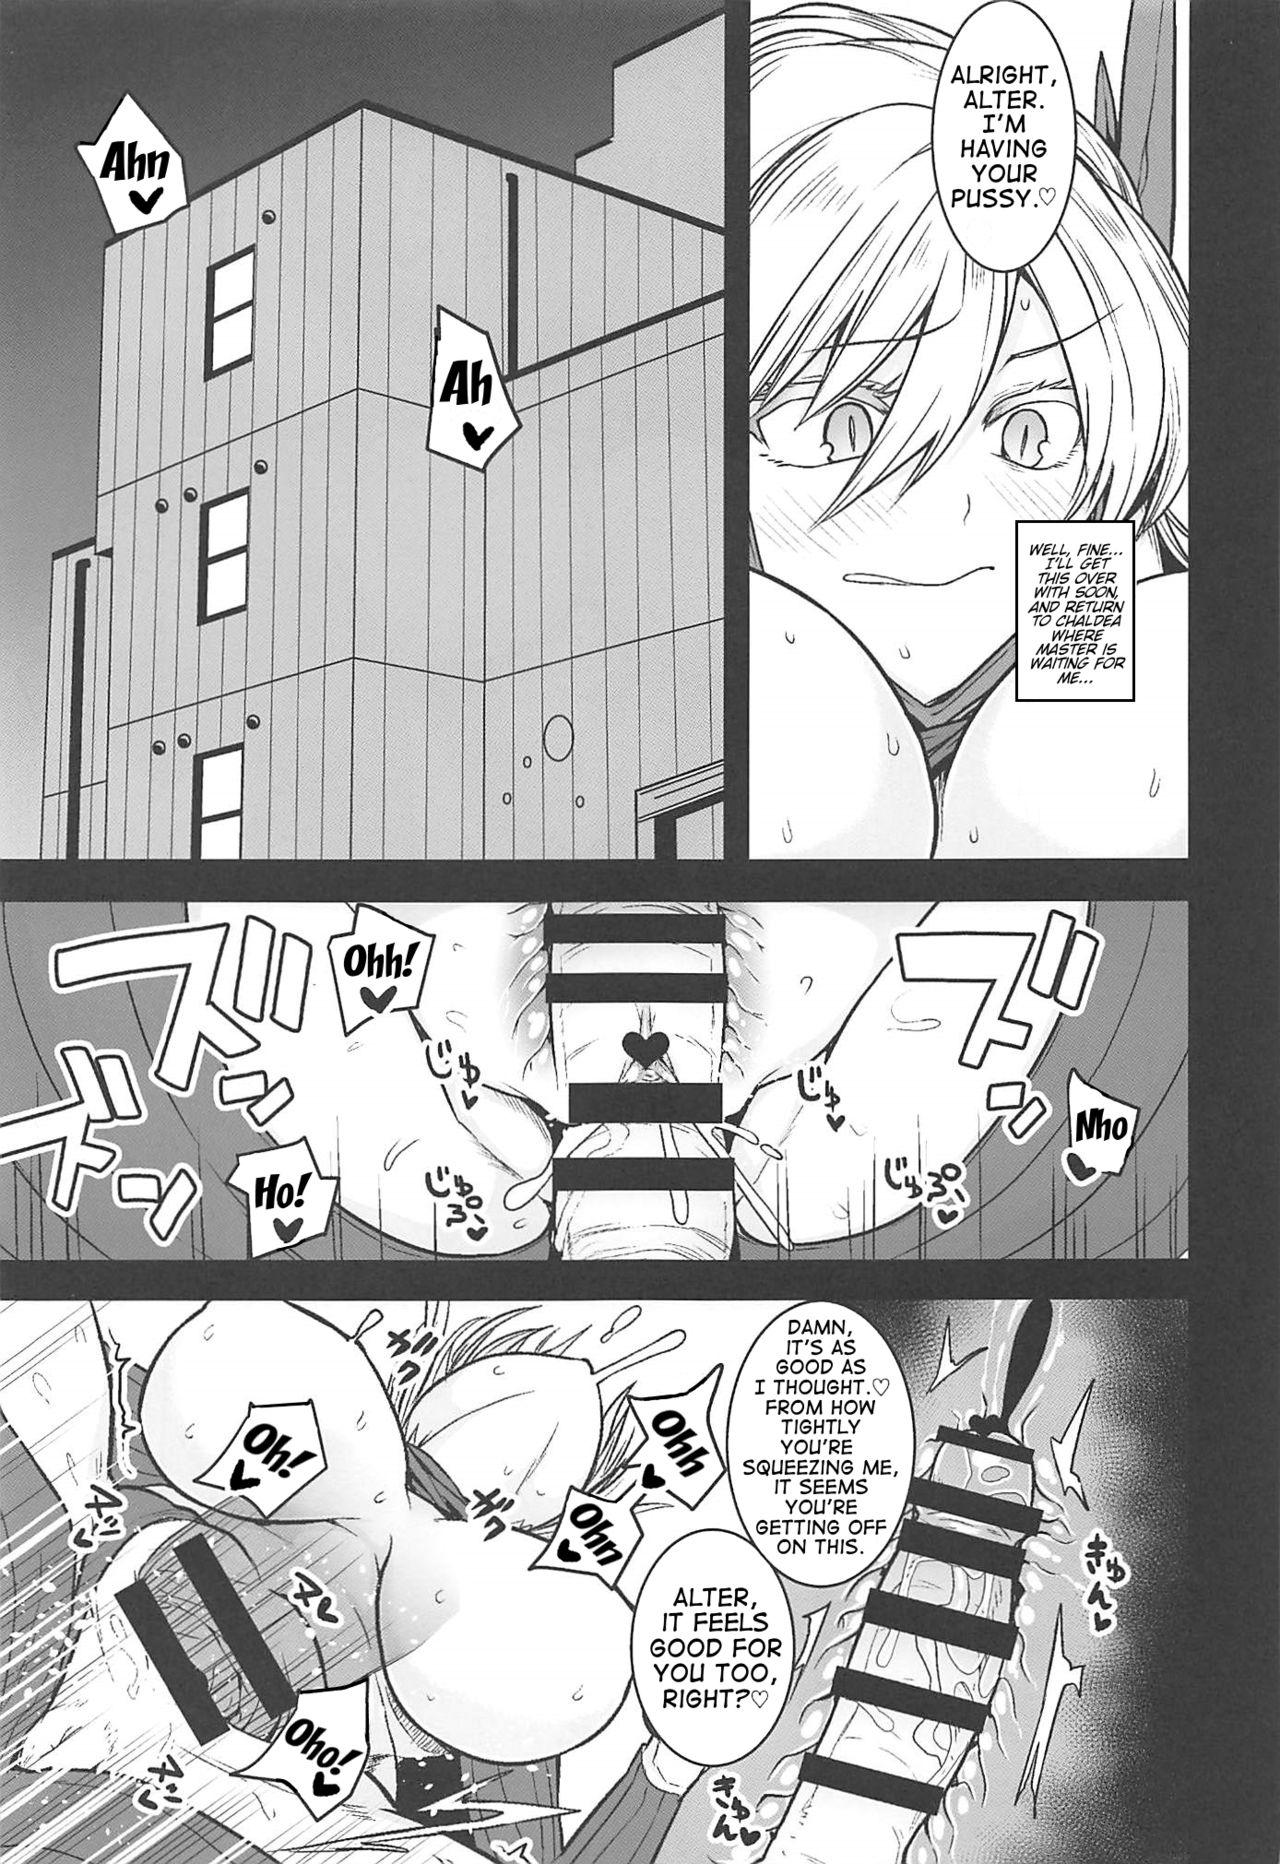 Fuck Pussy Friend Master to | With Friend Master - Fate grand order Adolescente - Page 4